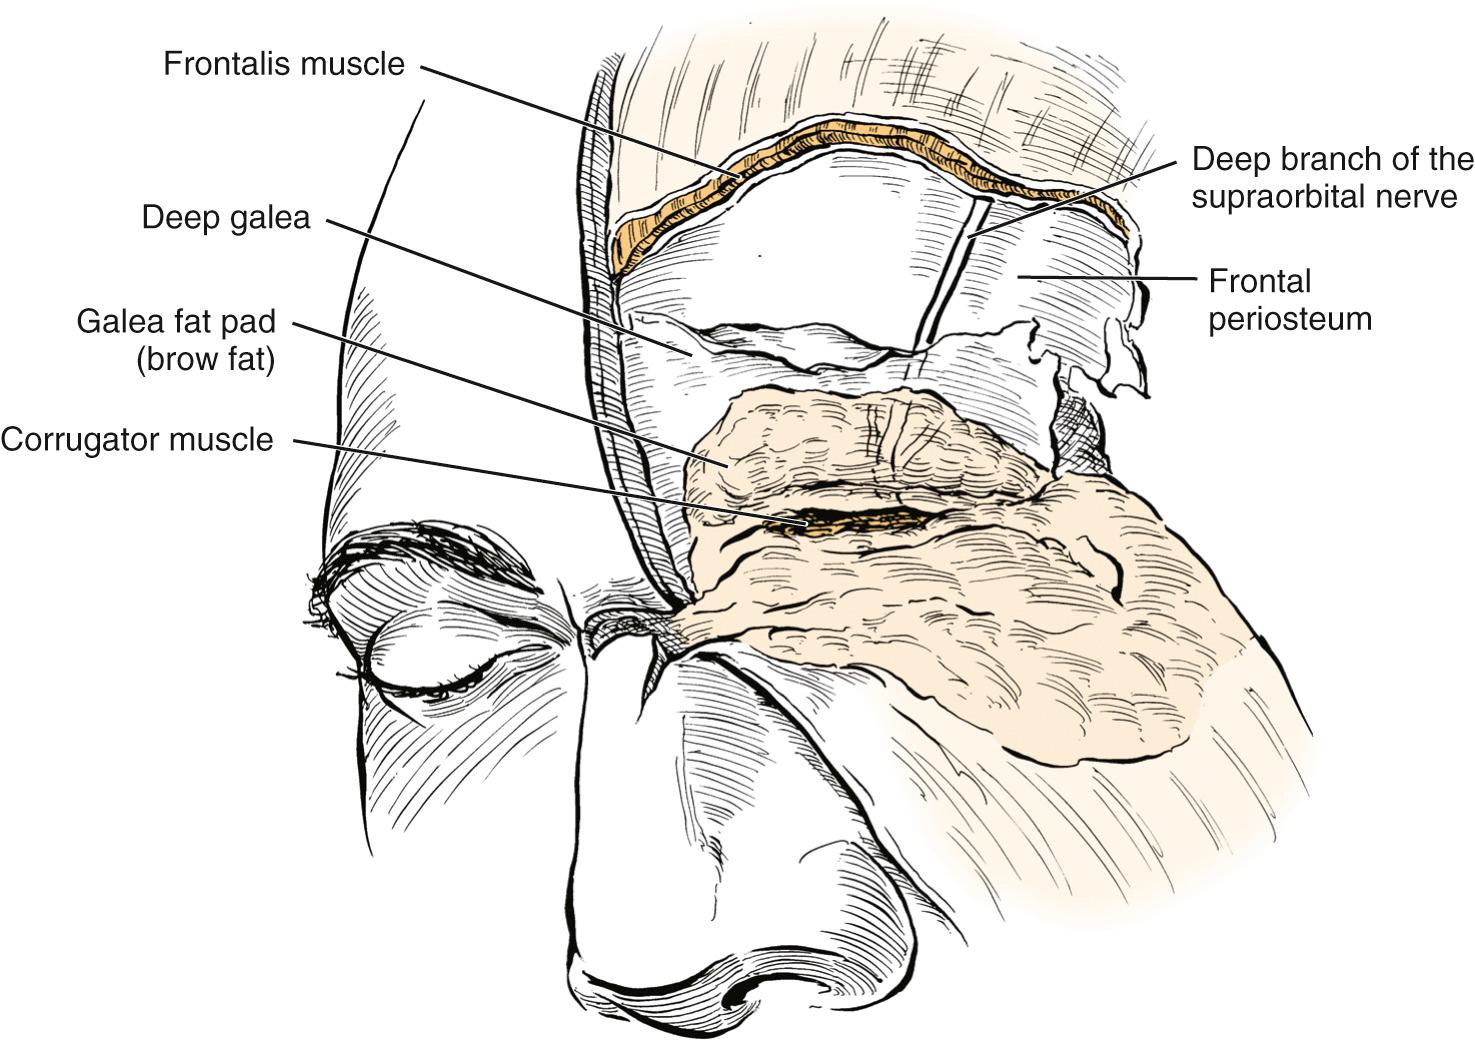 Fig. 25.6, The deep division of the supraorbital nerve runs in the floor of the glide plane space just superficial to the frontal periosteum. During a brow lift, if elevation of the forehead is errantly performed just superficial to the periosteum, this nerve can be injured. Injury to this nerve often causes parietal hypesthesia for 2 to 3 months followed by intense pruritus.